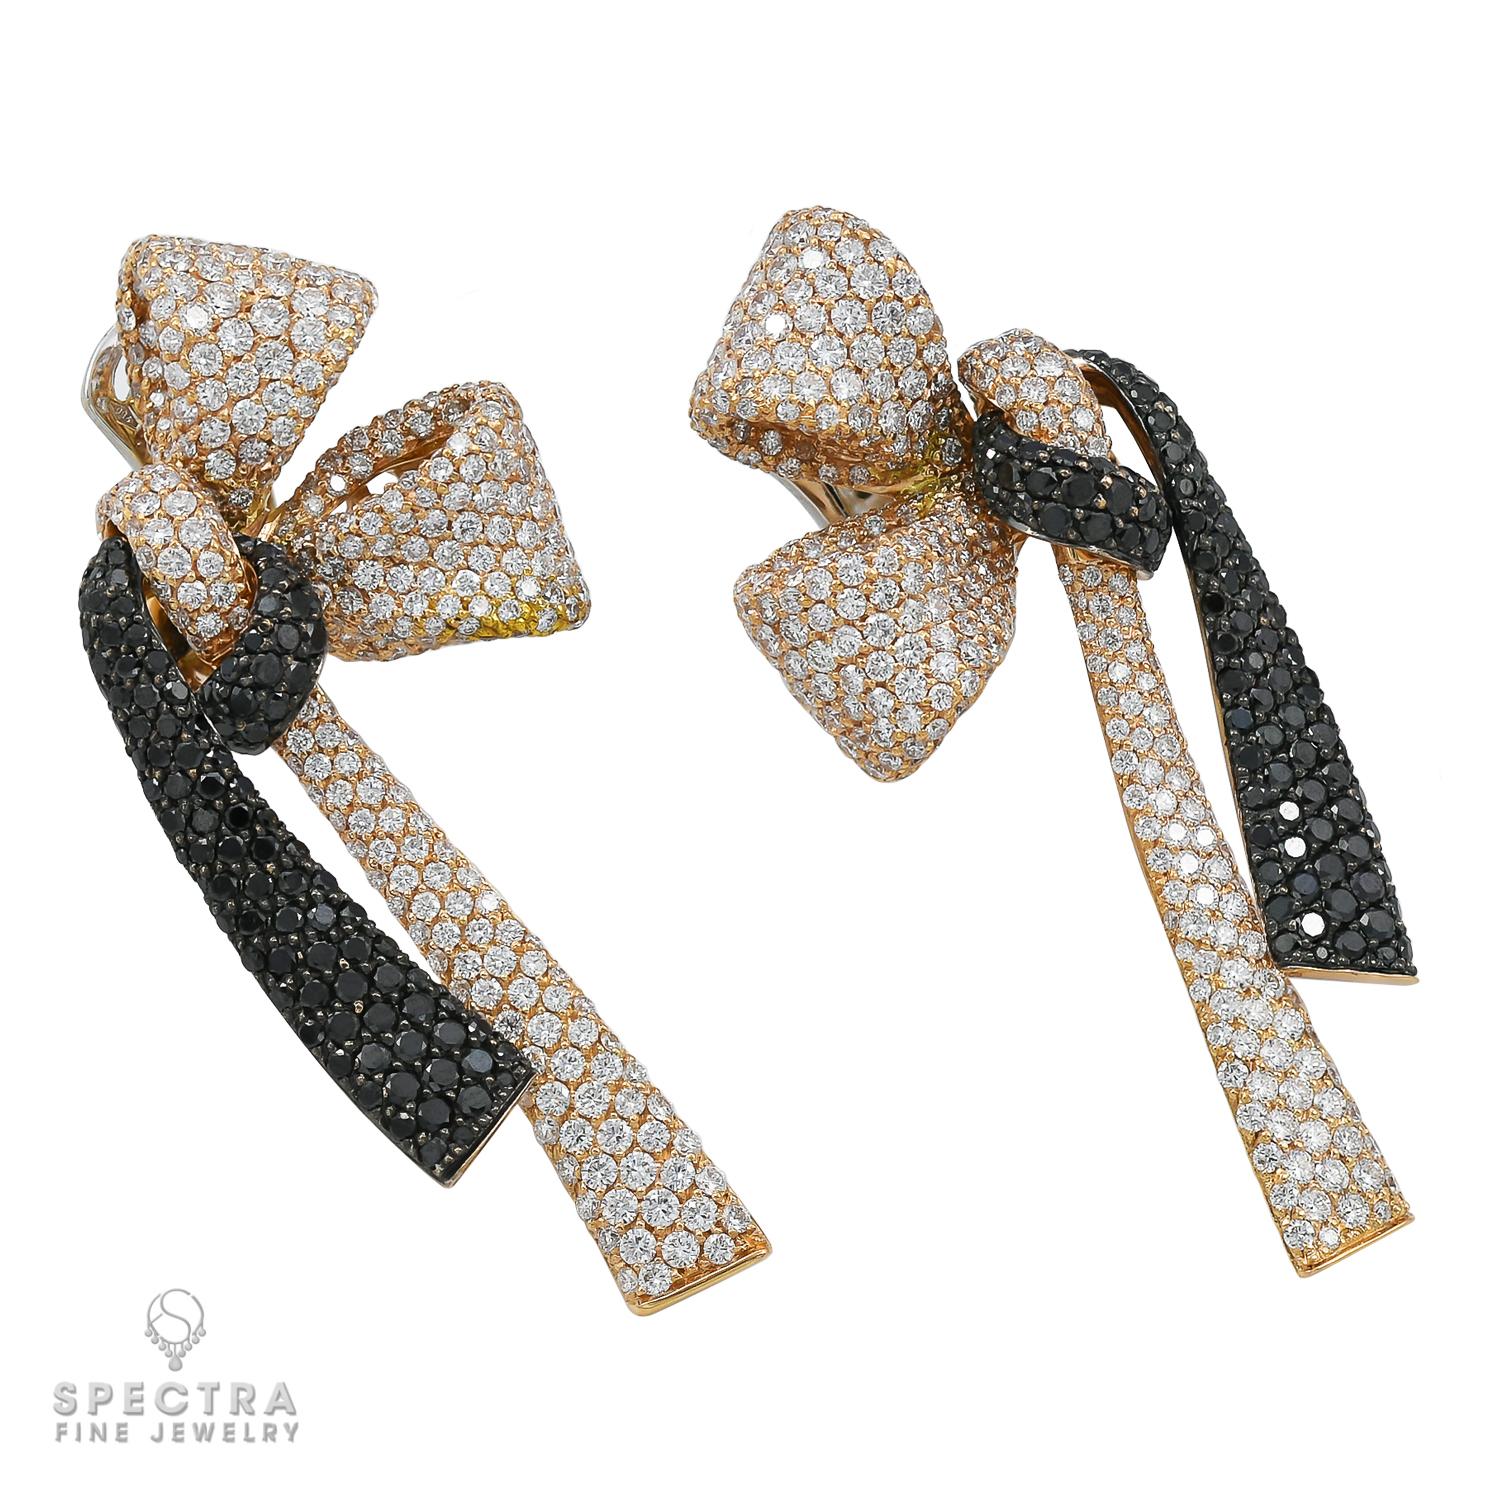 These Signed Palmiero Contemporary Diamond Bow Earrings, made circa 2010, drape beautifully on the ear when worn. The 18K white and yellow gold earrings set with black and white round brilliant-cut diamonds, weighing approximately 8.62 carats in